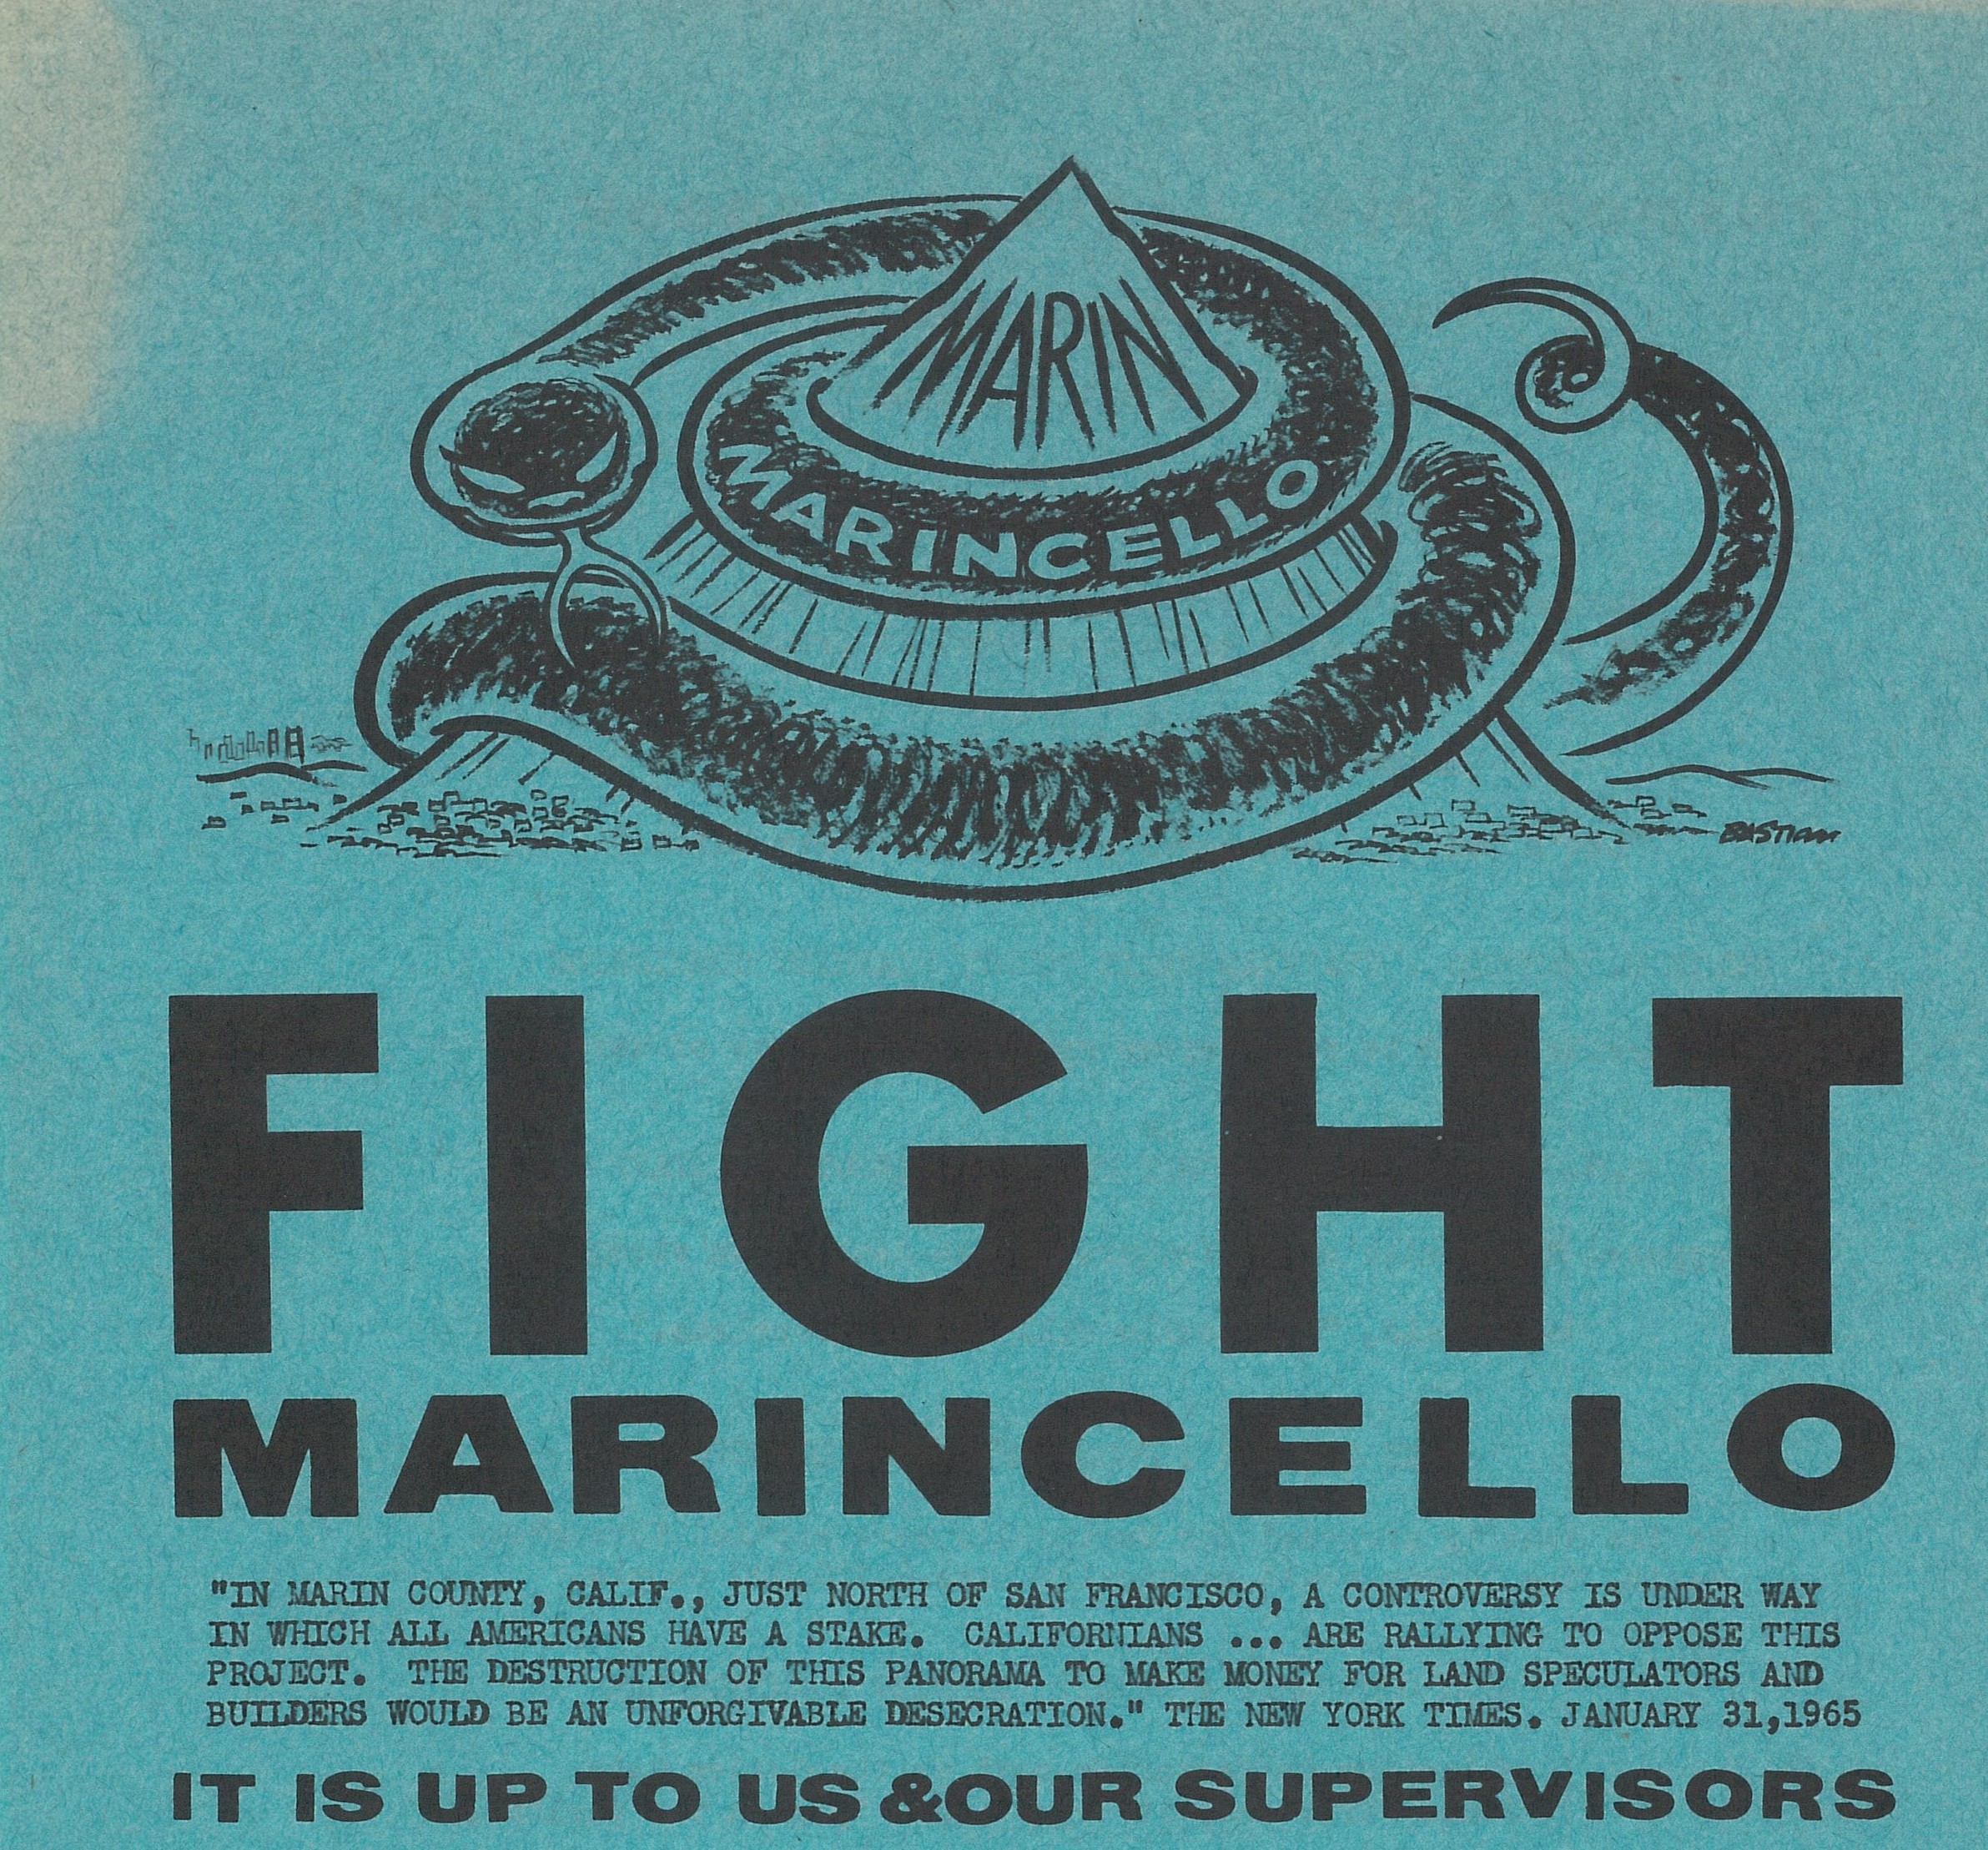 This is an image from a 1965 flyer protesting the Marincello Master Plan.